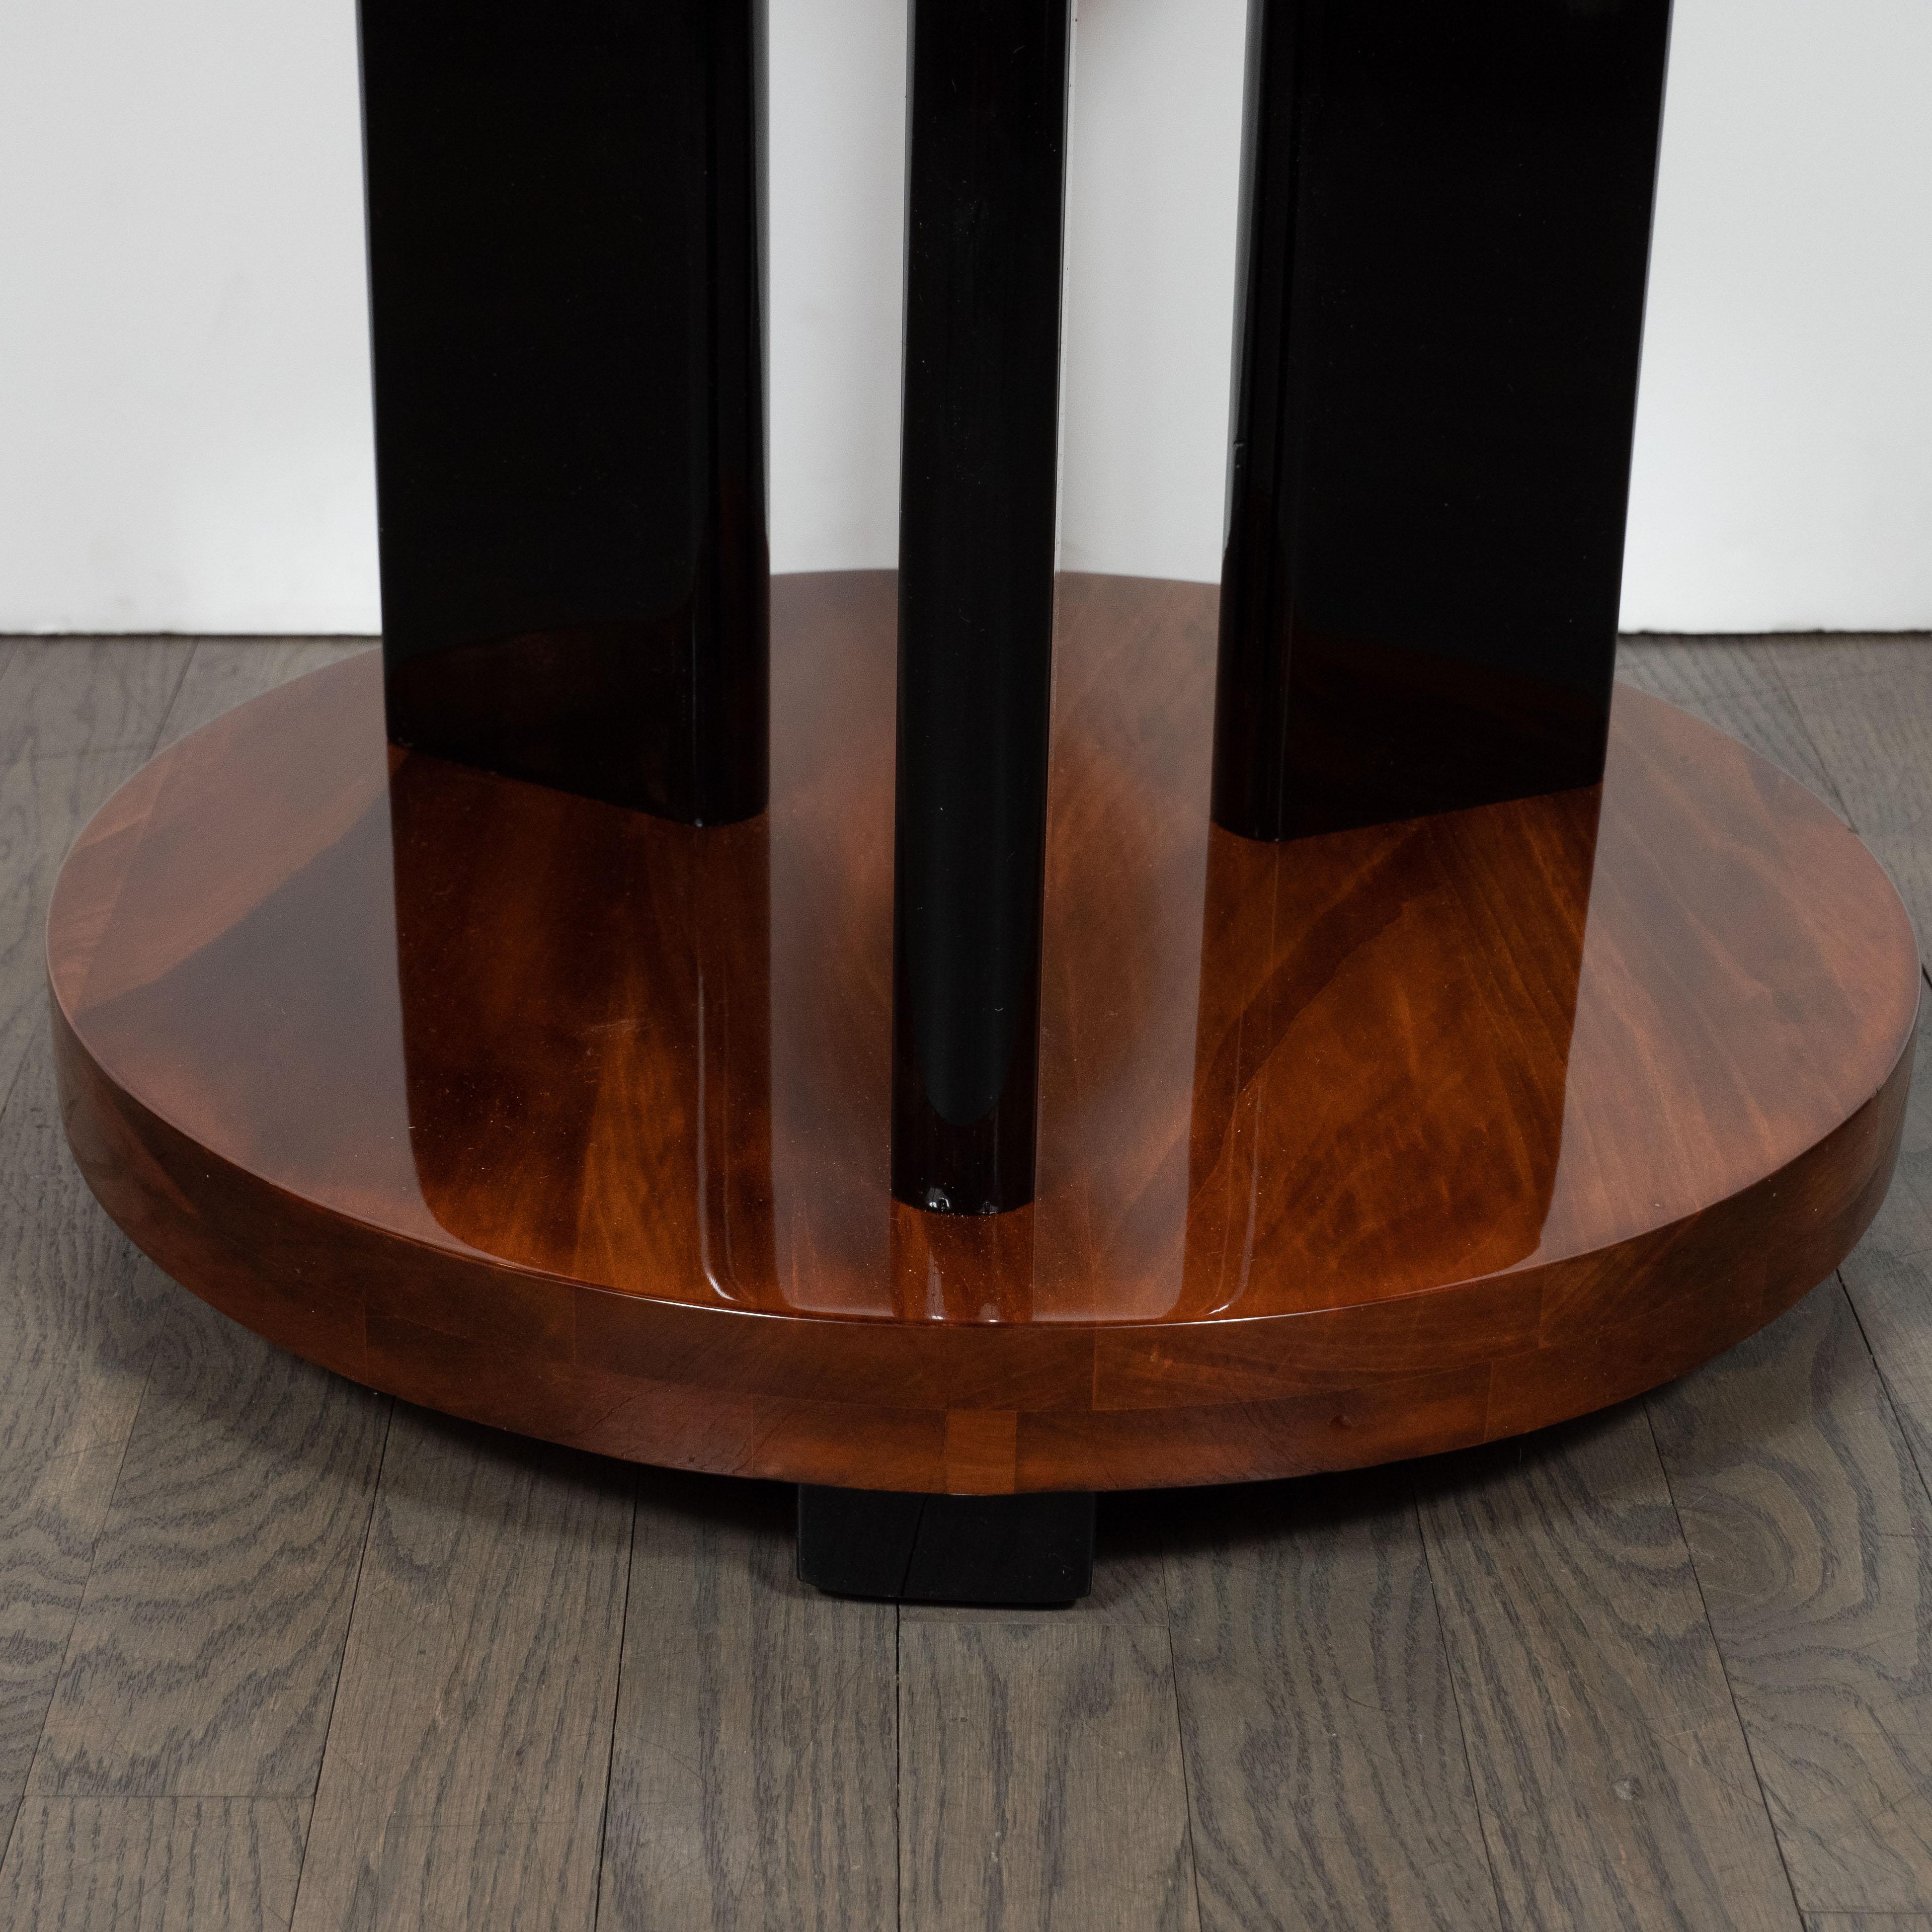 Art Deco Machine Age Three-Tier Bookmatched Walnut and Black Lacquer Side Table For Sale 2